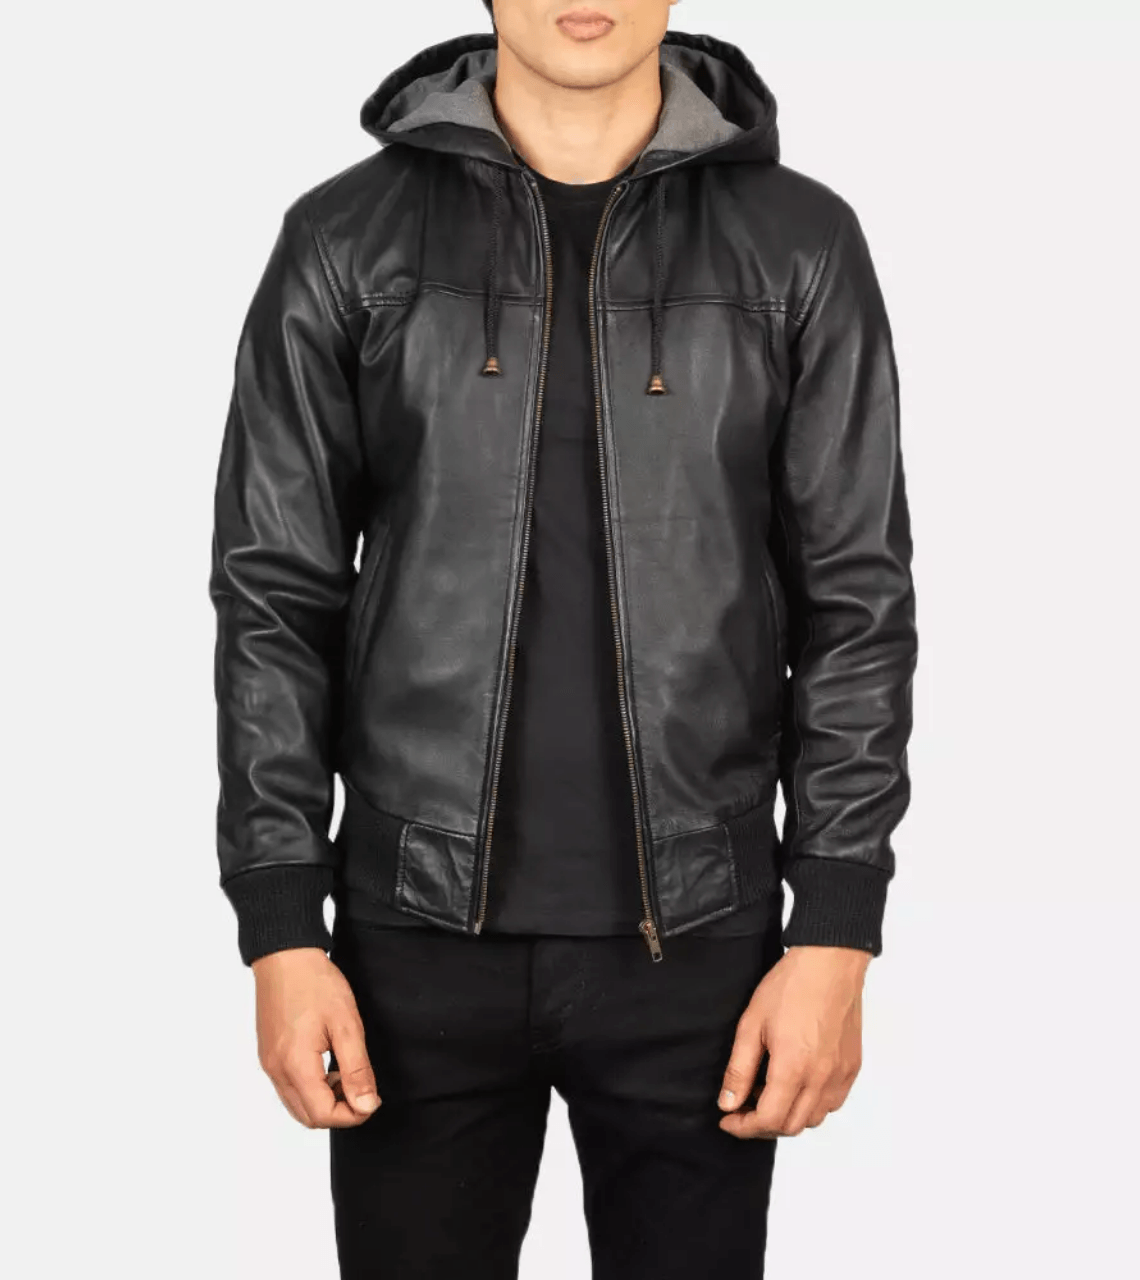 Aiguille Hooded Men's Leather Bomber Jacket